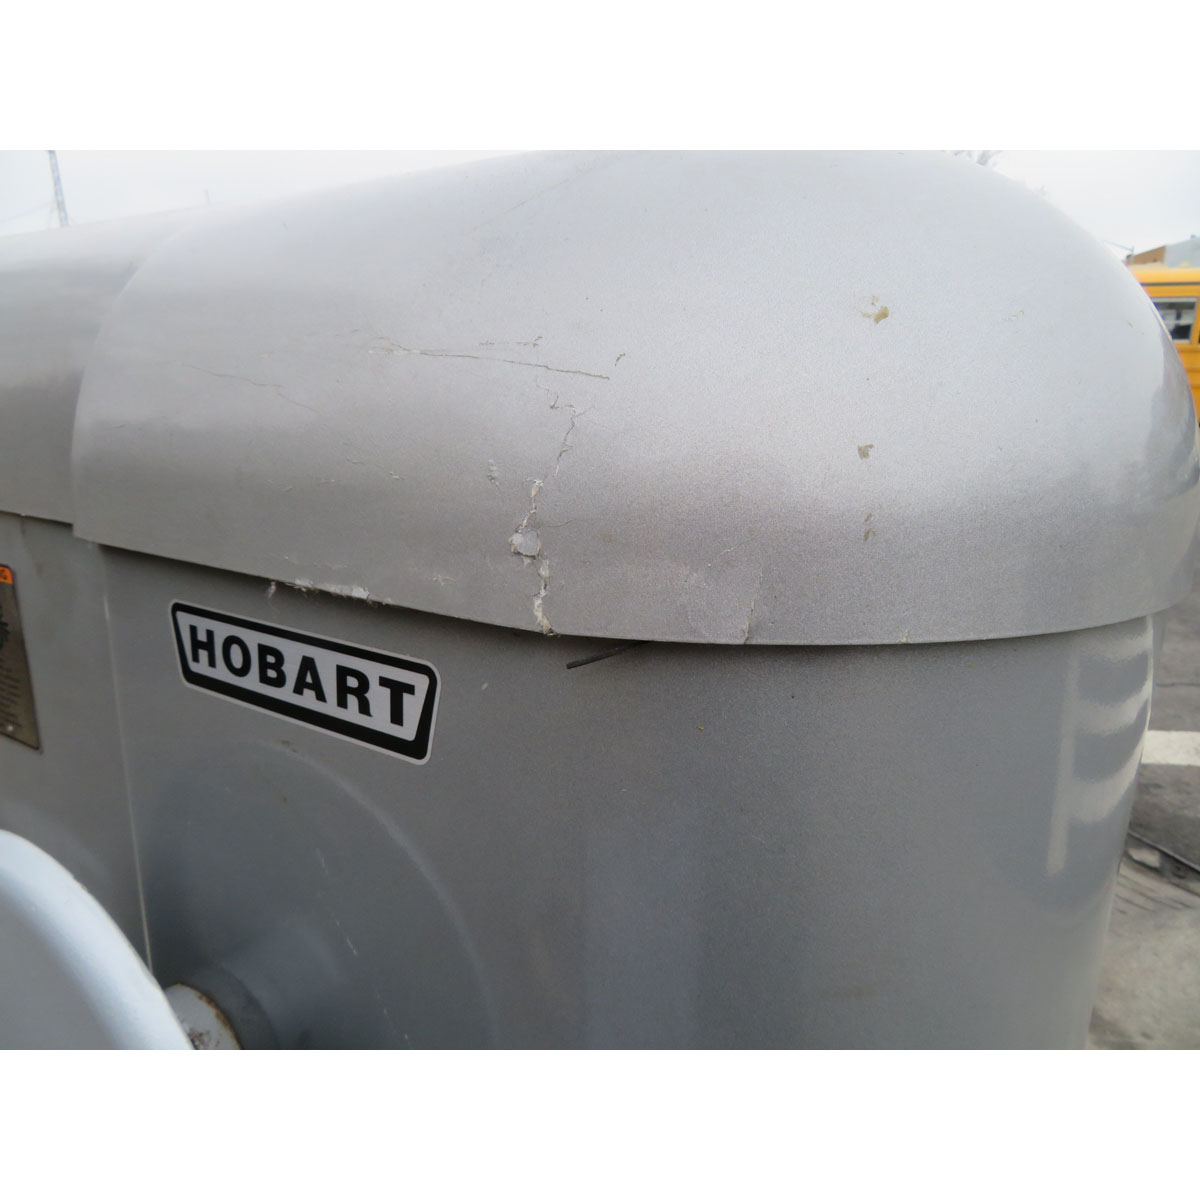 Hobart 80 Quart L800 Mixer, Used Very Good Condition image 4